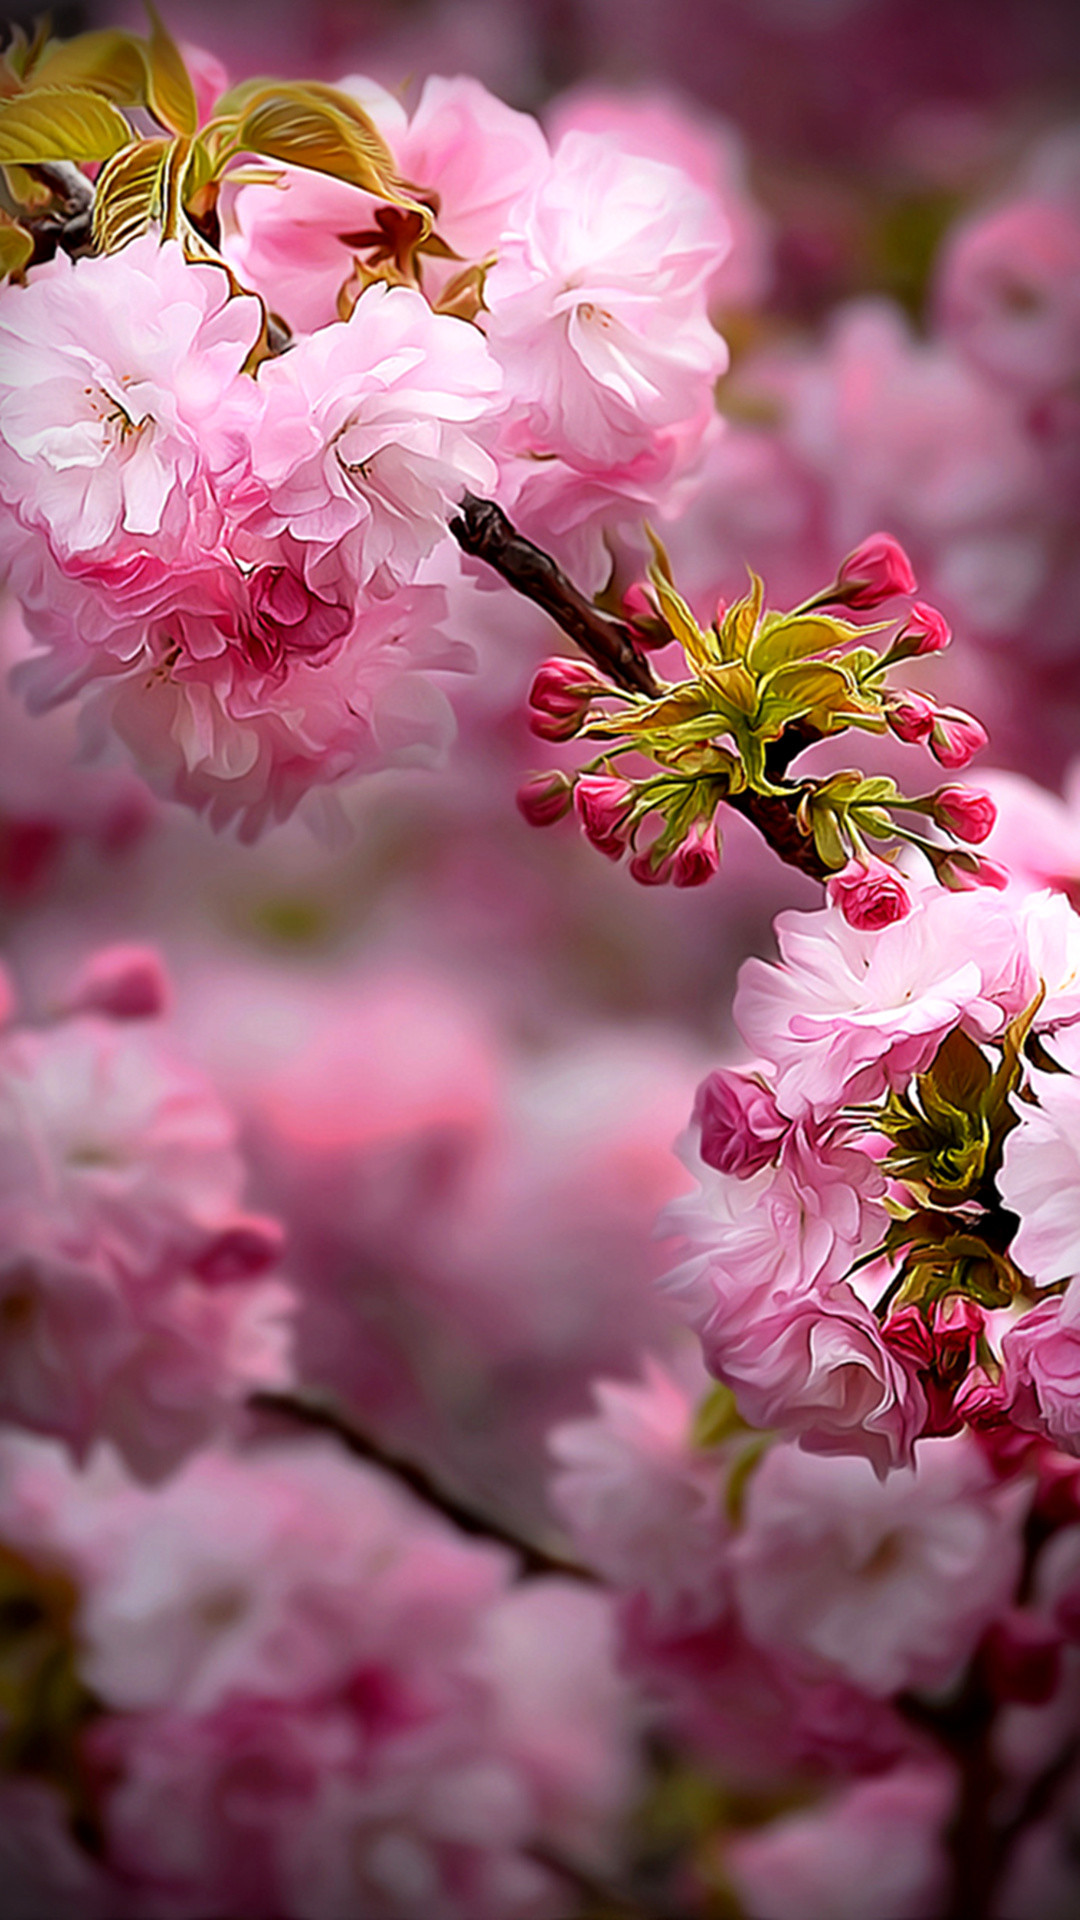 15 Perfect spring wallpaper hd phone You Can Download It For Free ...